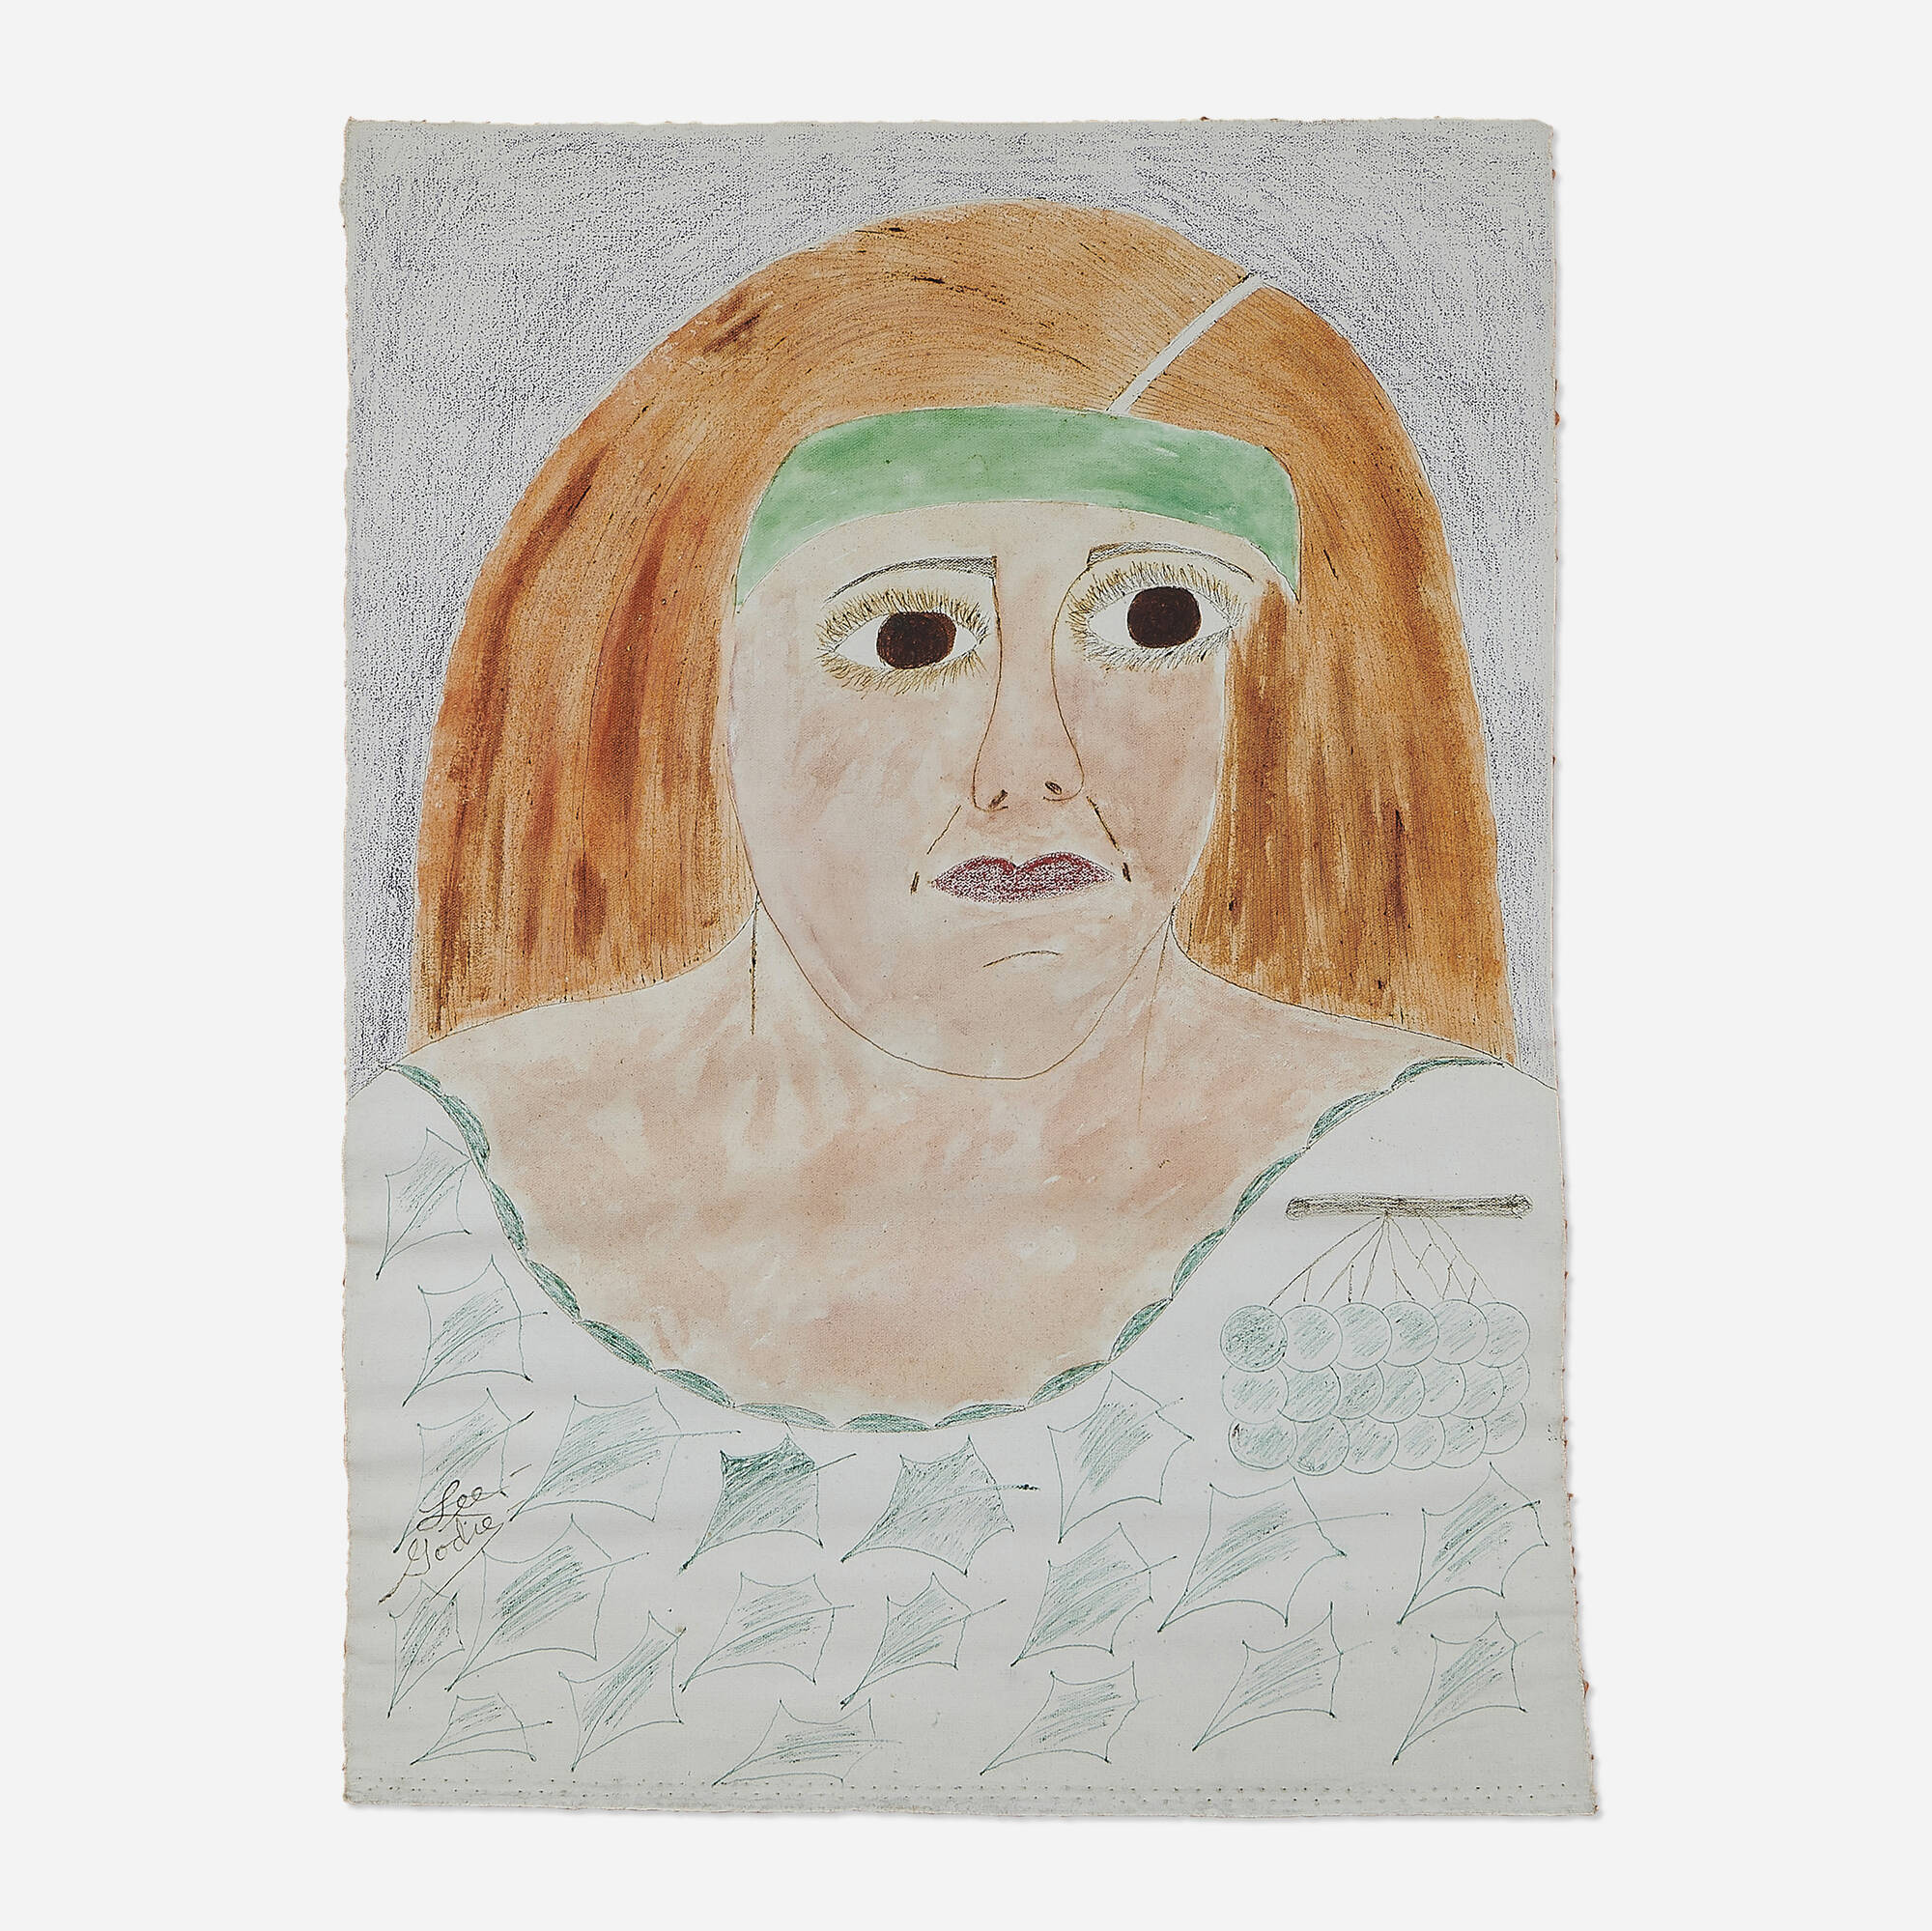 145: LEE GODIE, Woman with Green Headband < Folk, Outsider & Self-Taught  Art + Americana, 11 October 2022 < Auctions | Toomey & Co. Auctioneers